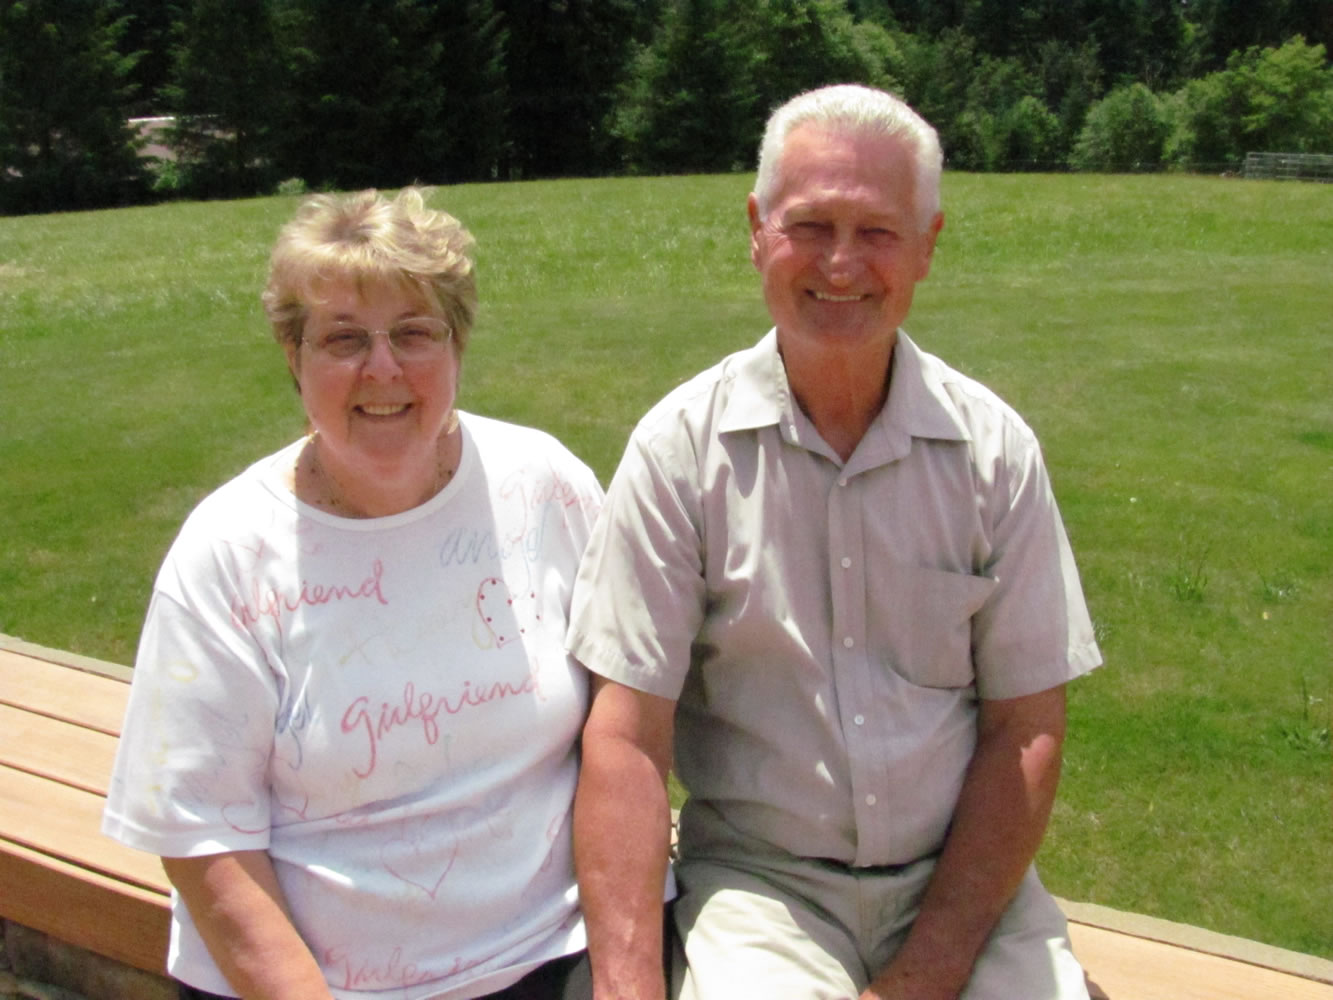 Pam and Jim Clark, of Washougal, have been named 2013 Camas Days Royalty.